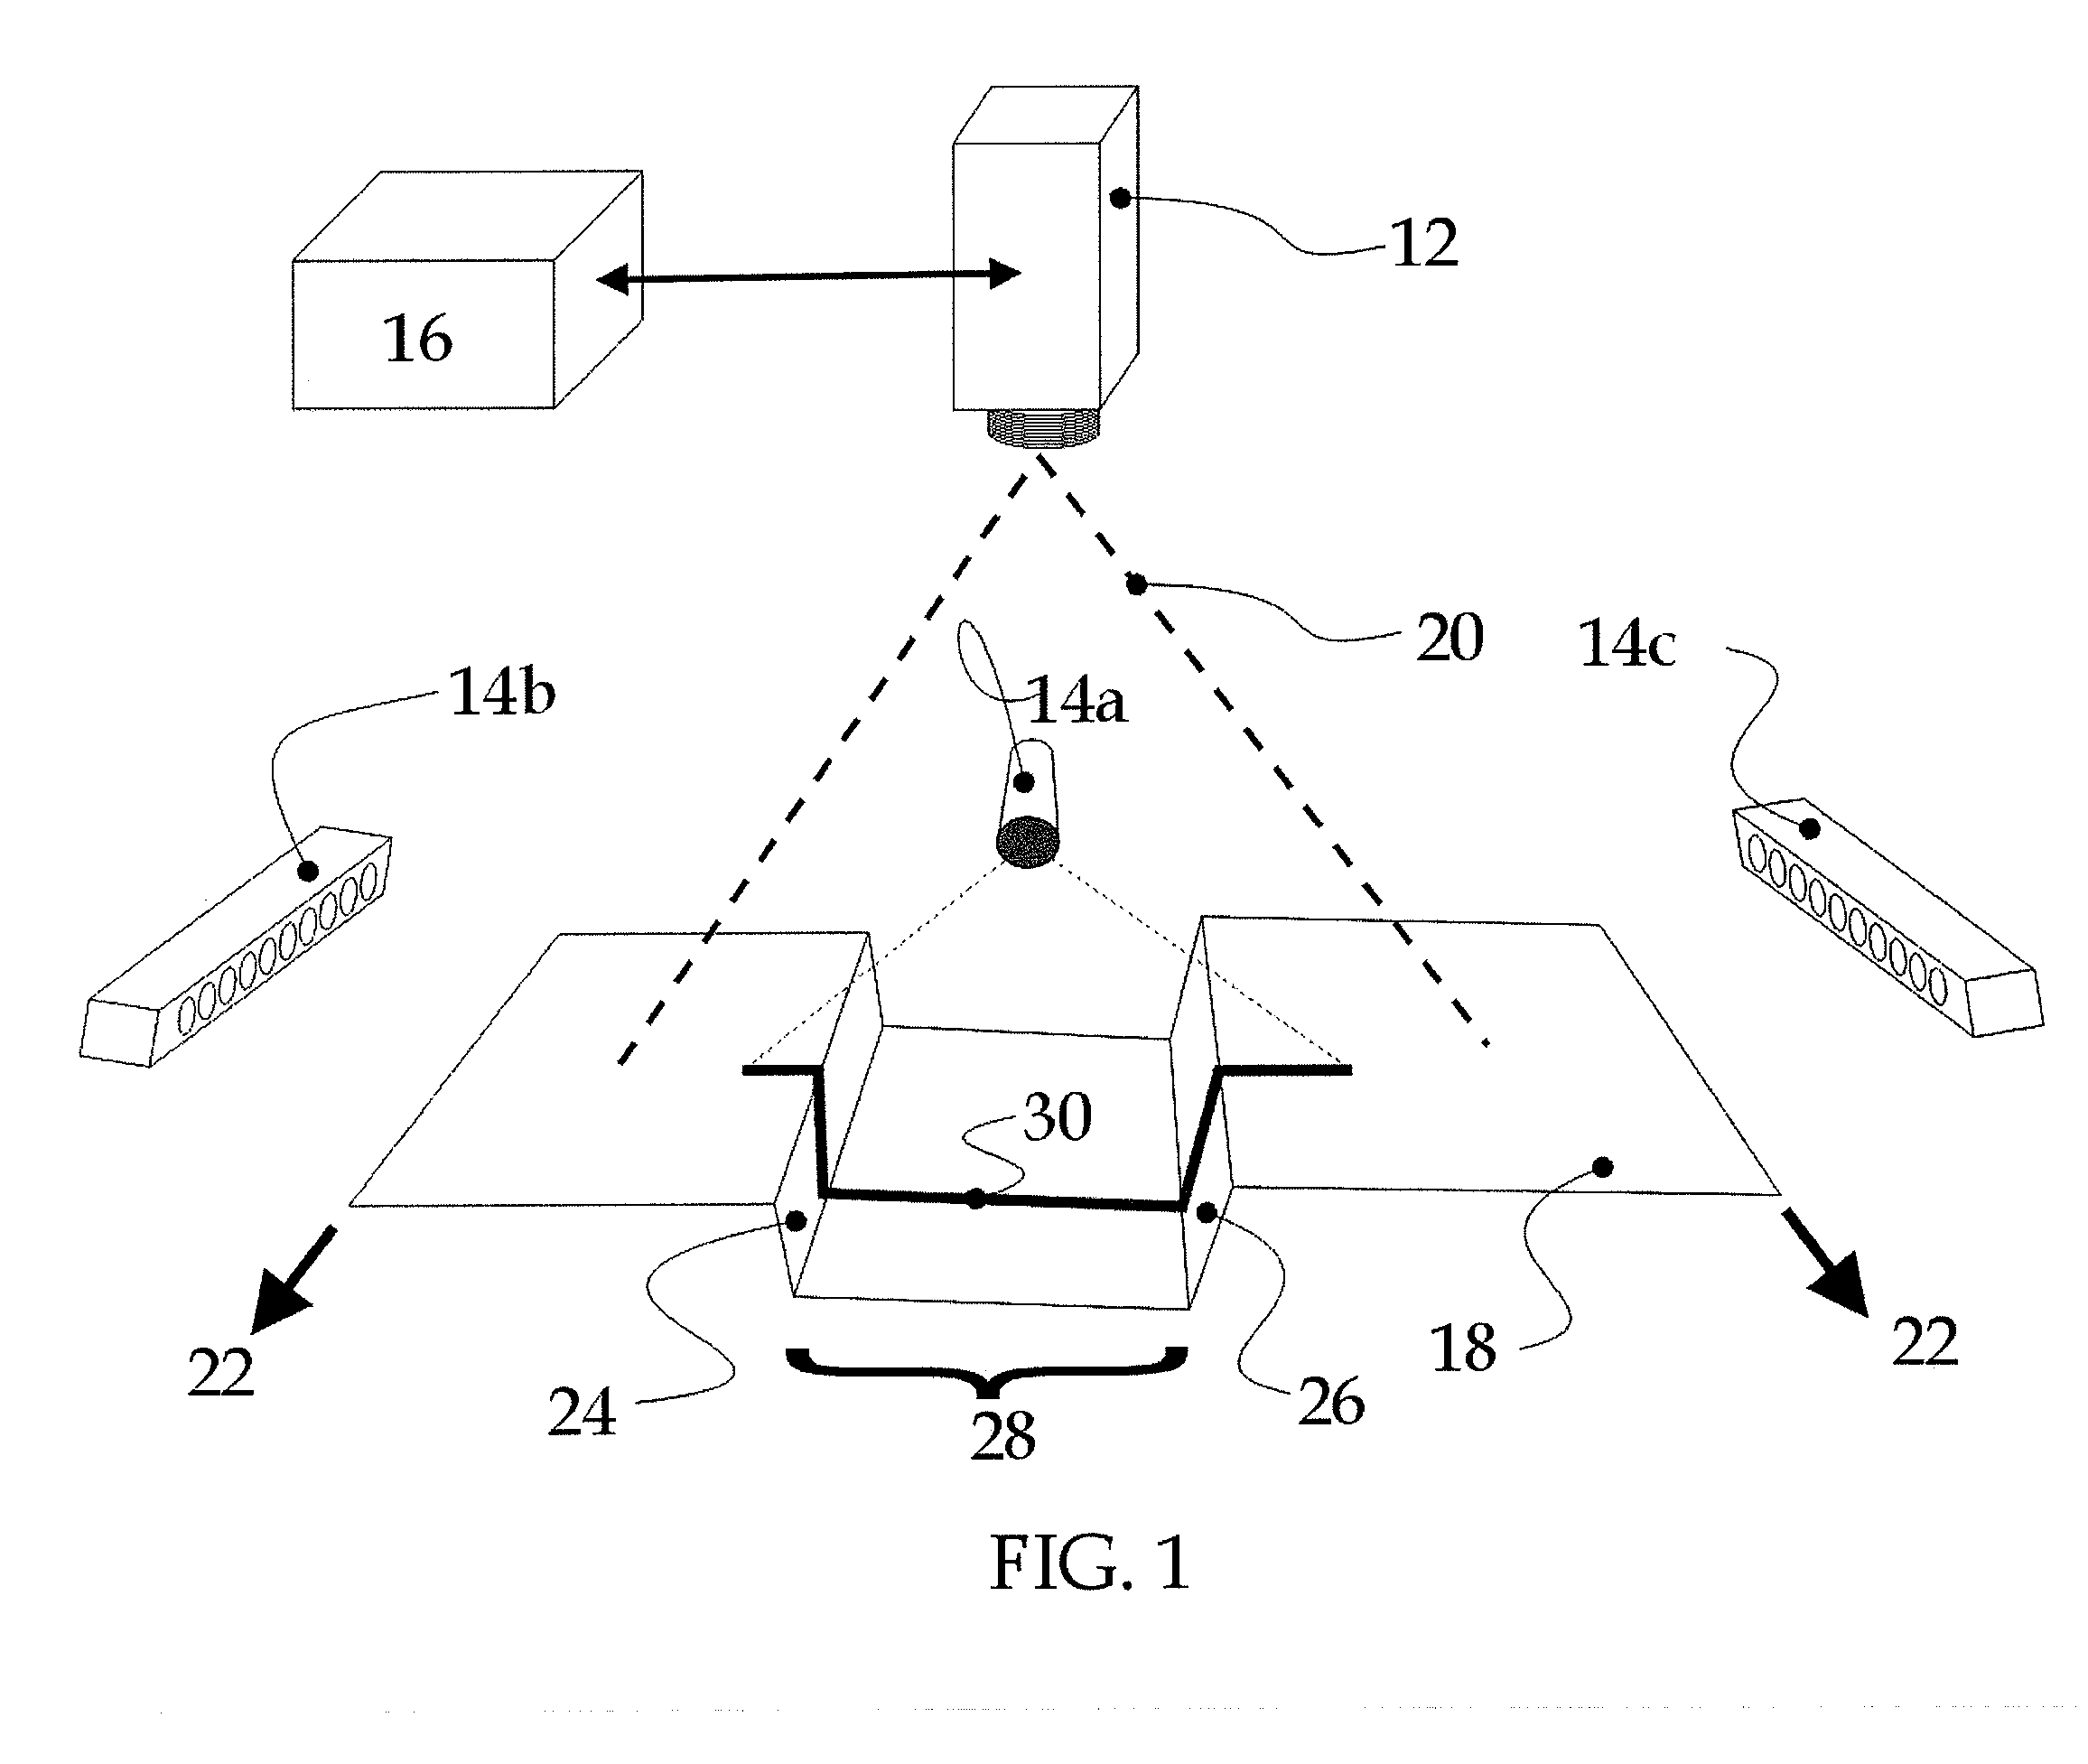 Method and System for Two-Dimensional and Three-Dimensional Inspection of a Workpiece